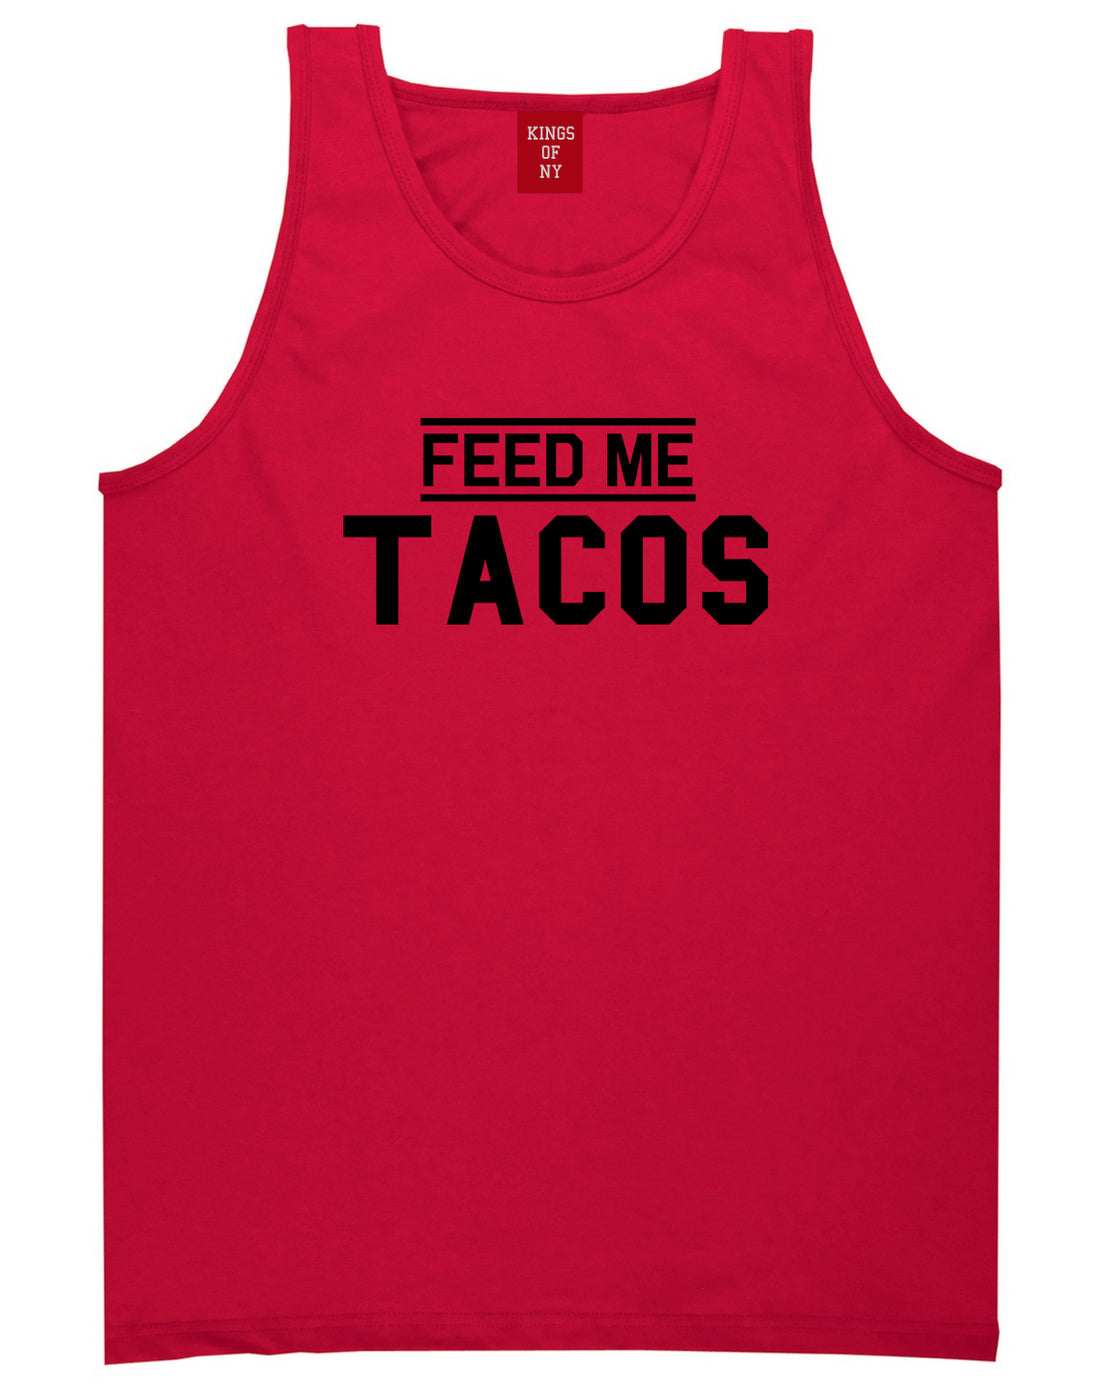 Feed Me Tacos Mens Red Tank Top Shirt by KINGS OF NY